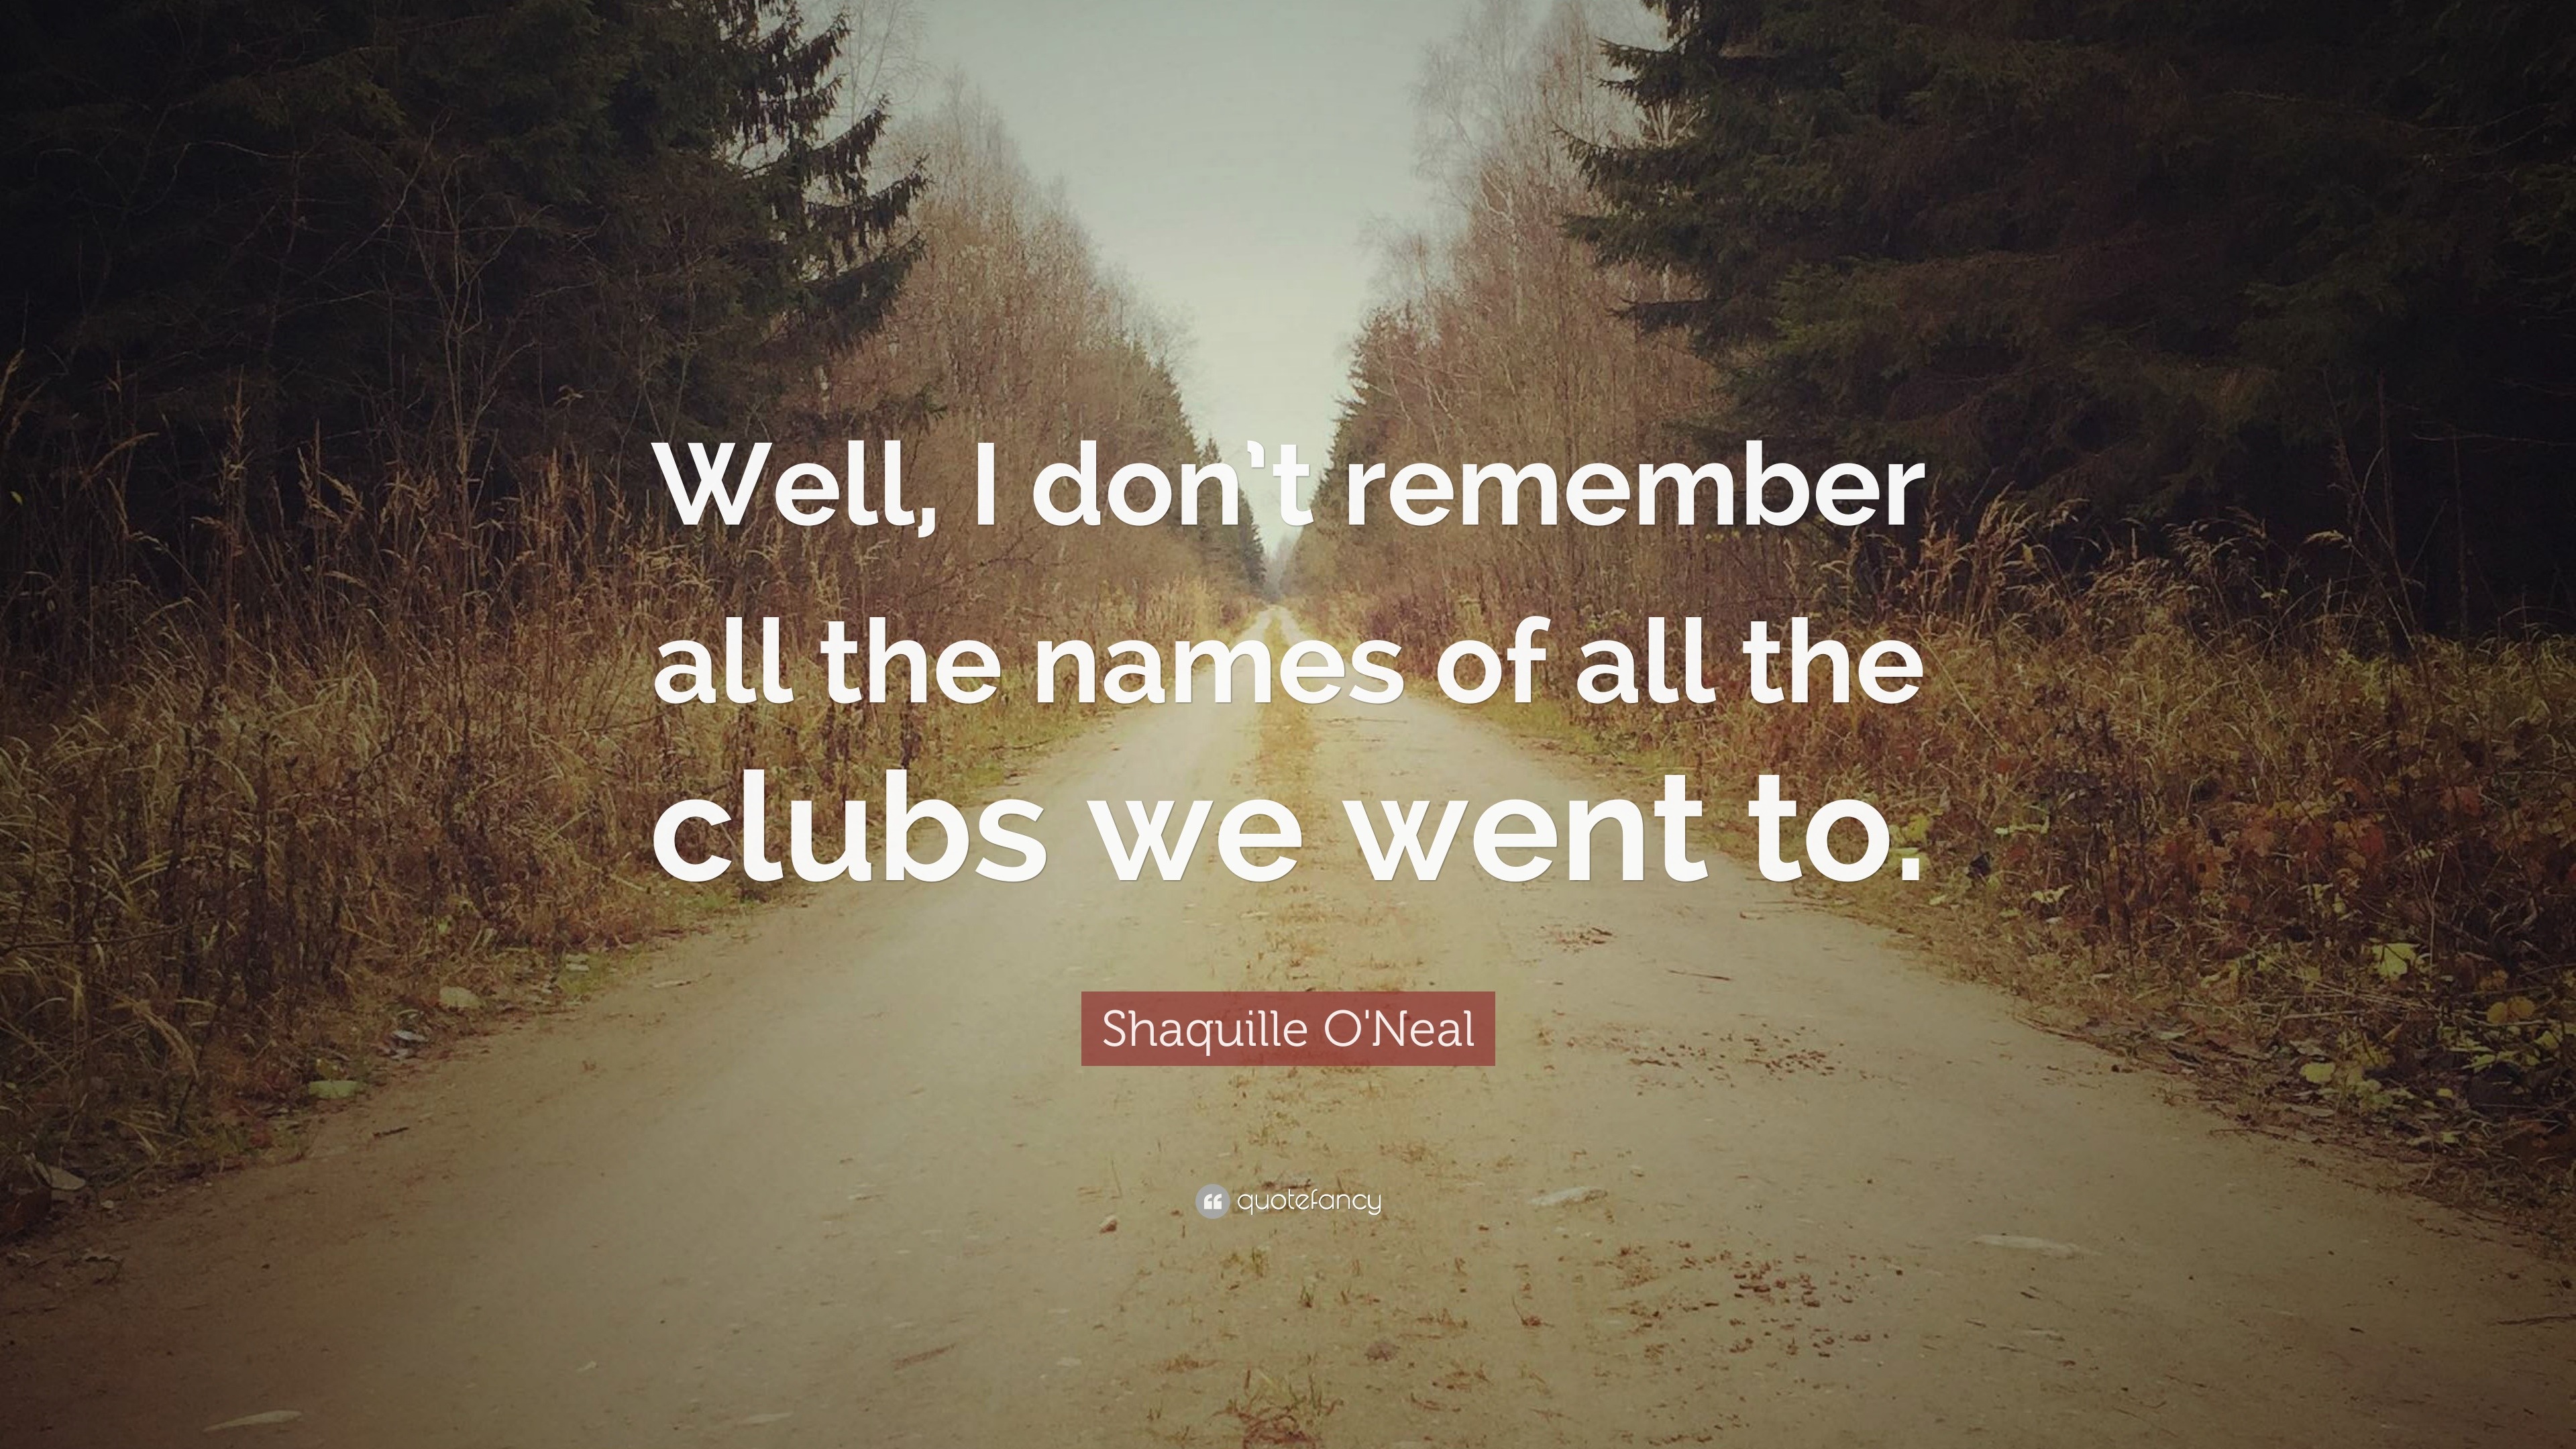 Well, I don’t remember all the names of all the clubs we went to. 